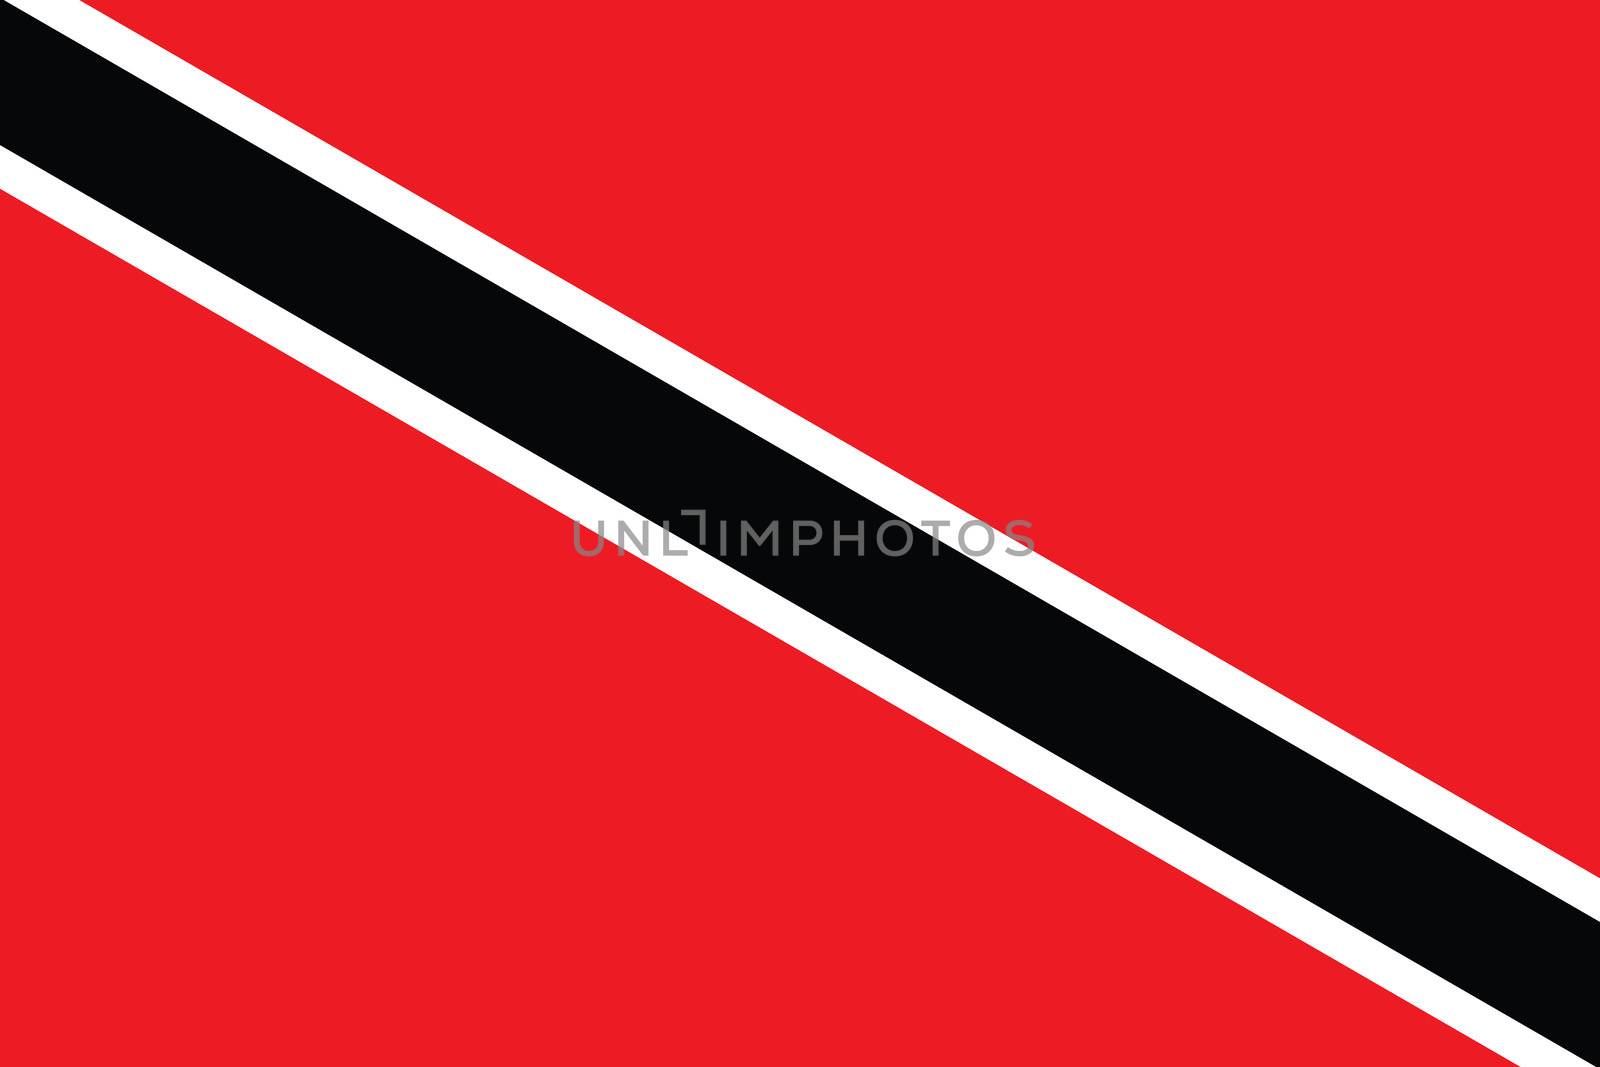 An Illustrated Drawing of the flag of Trinidad and Tobago